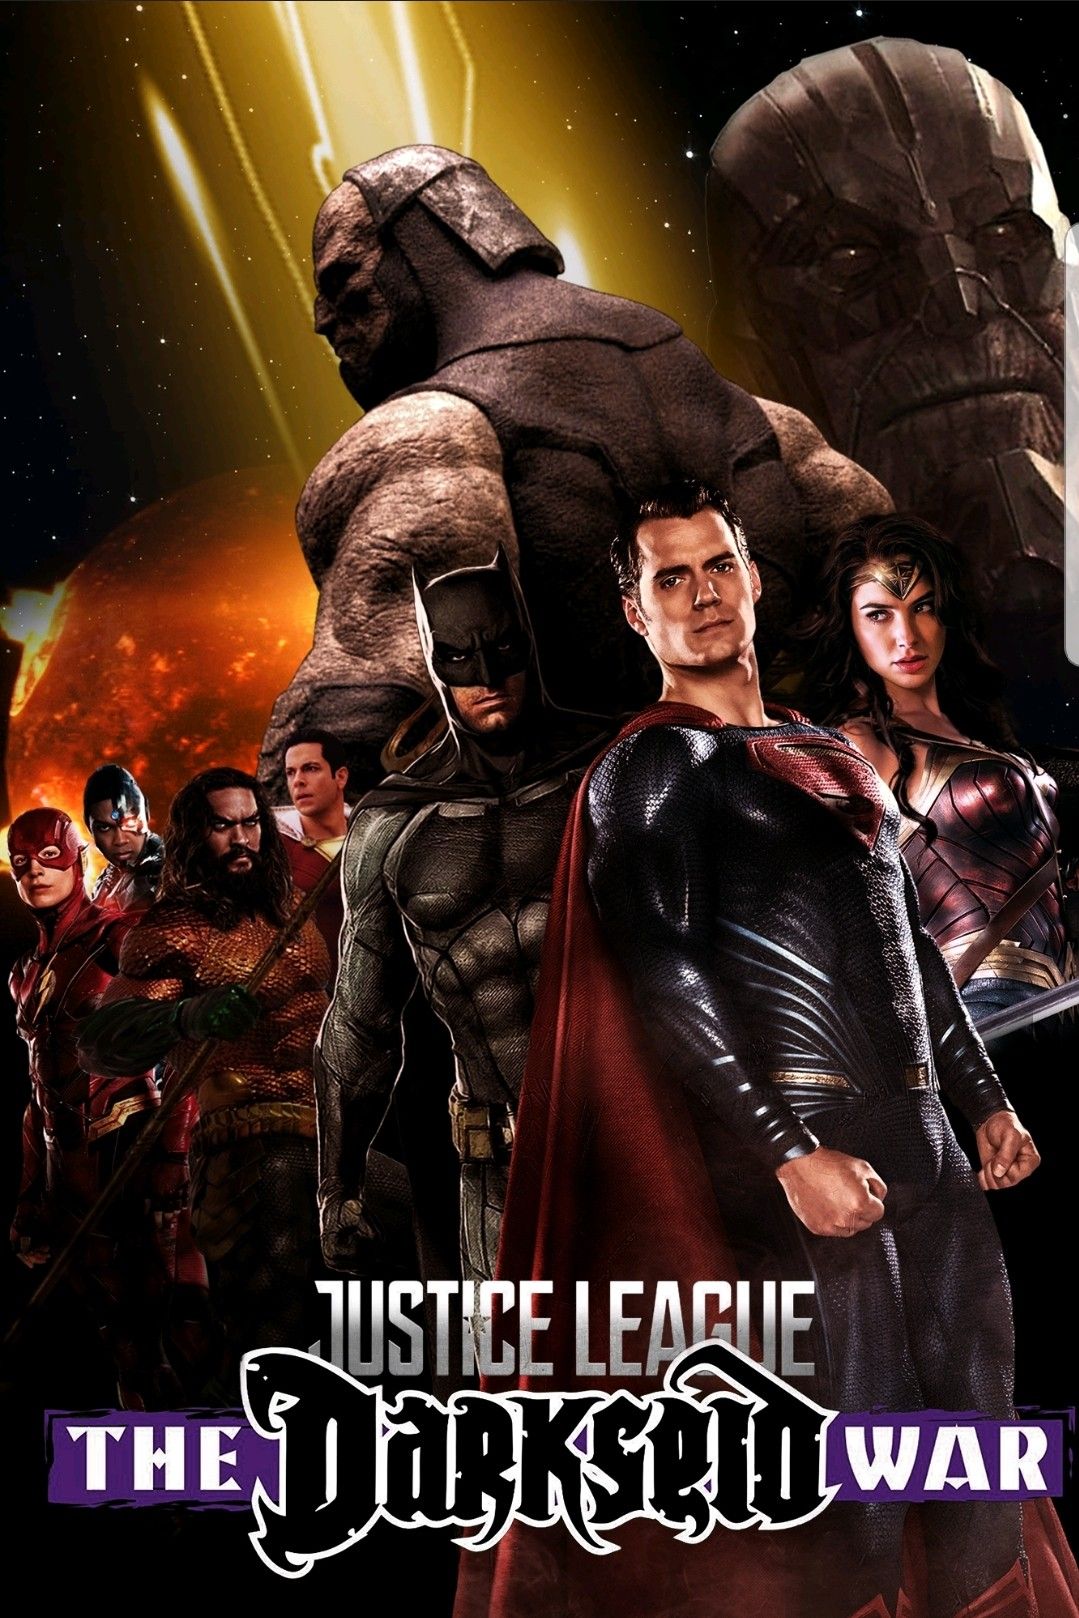 Justice League: The Darkseid War. Do you want WB to eventually lead to Darkseid in the DCEU? Darkseid came before Thanos but g. Vilãs, Justice league, Super herói